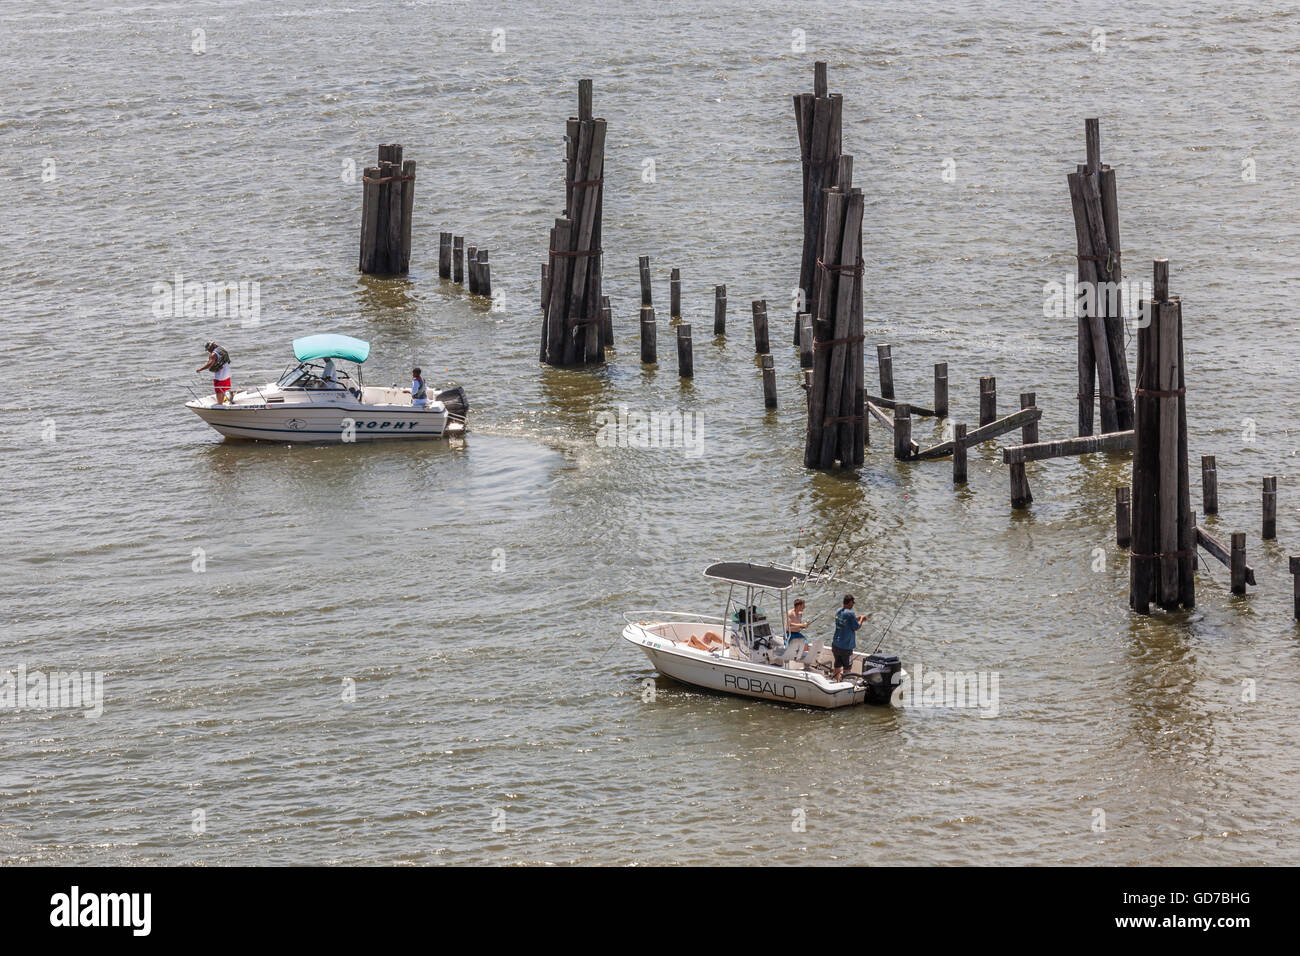 Men fishing from boats near remnants of wooden fishing pier destroyed by a hurricane in Biloxi, Mississippi Stock Photo